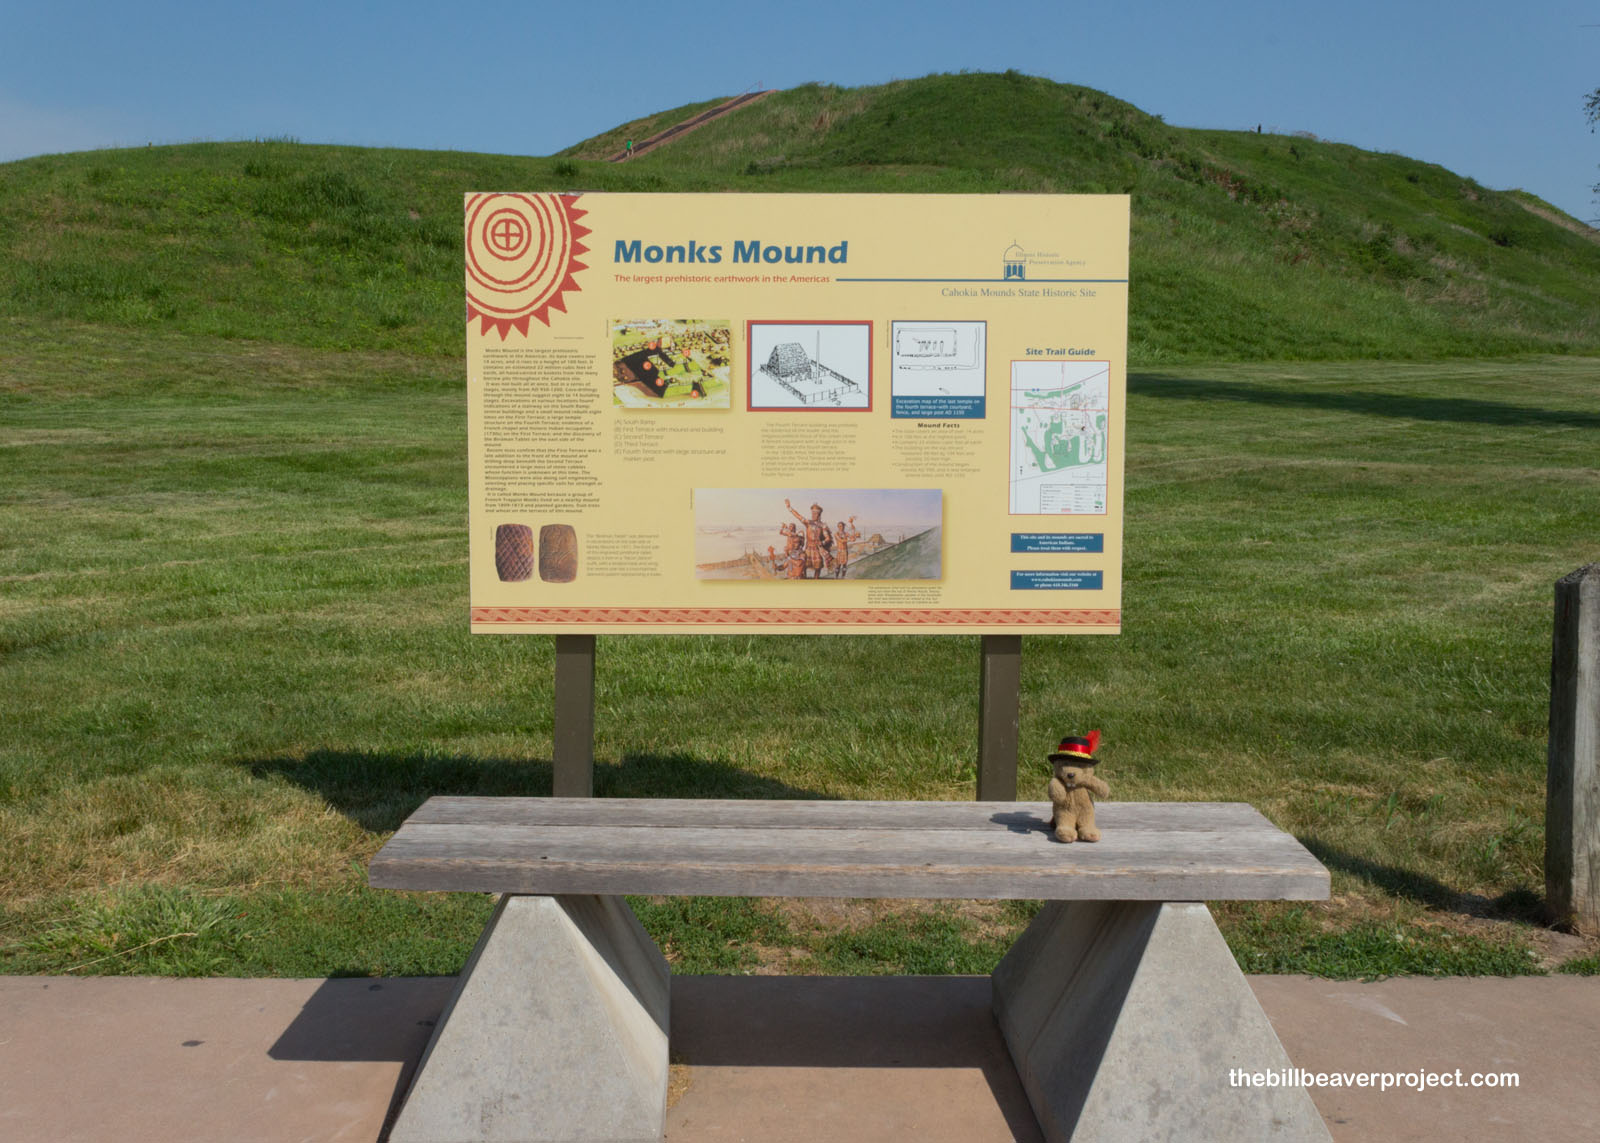 The mighty Monks Mound!